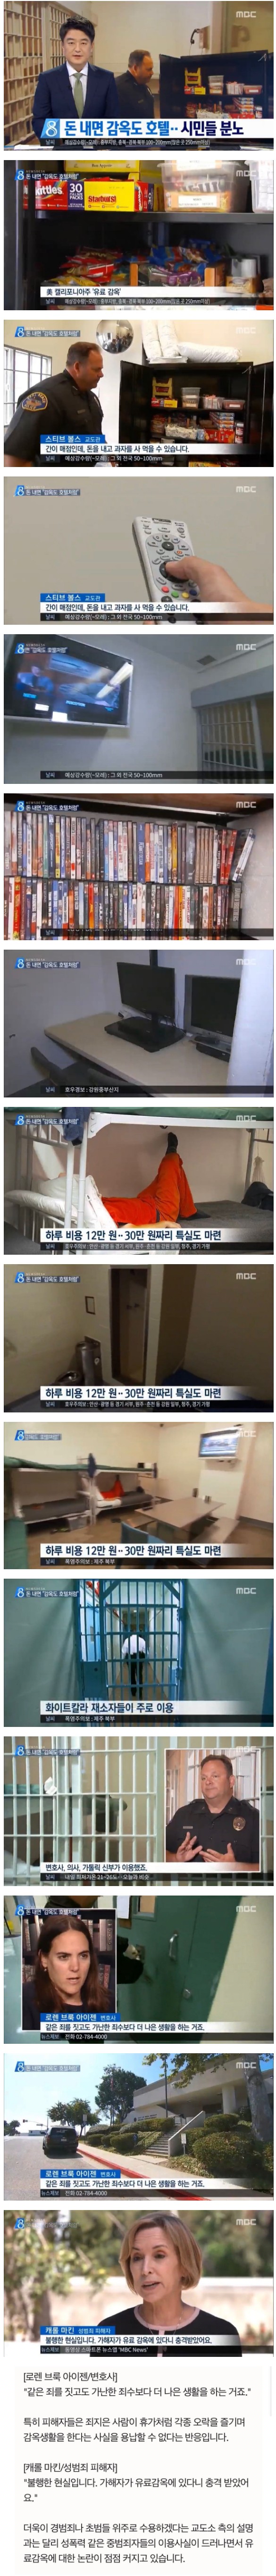 An accommodation in the United States that costs 120,000 won a day.